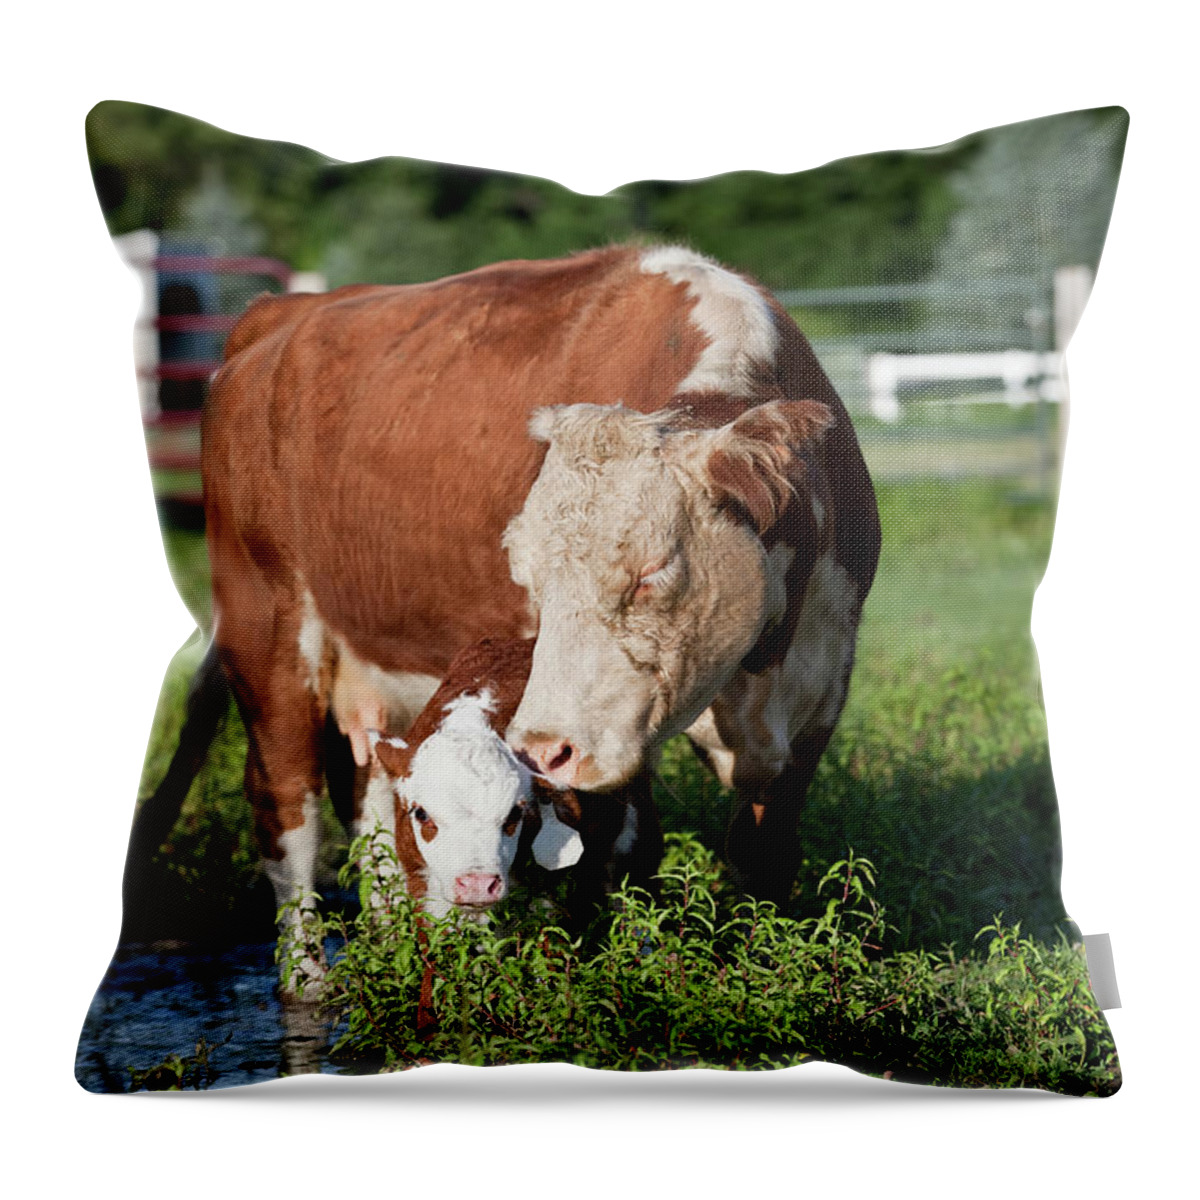 Domestic Animals Throw Pillow featuring the photograph Hereford Cow & Calf by Emholk